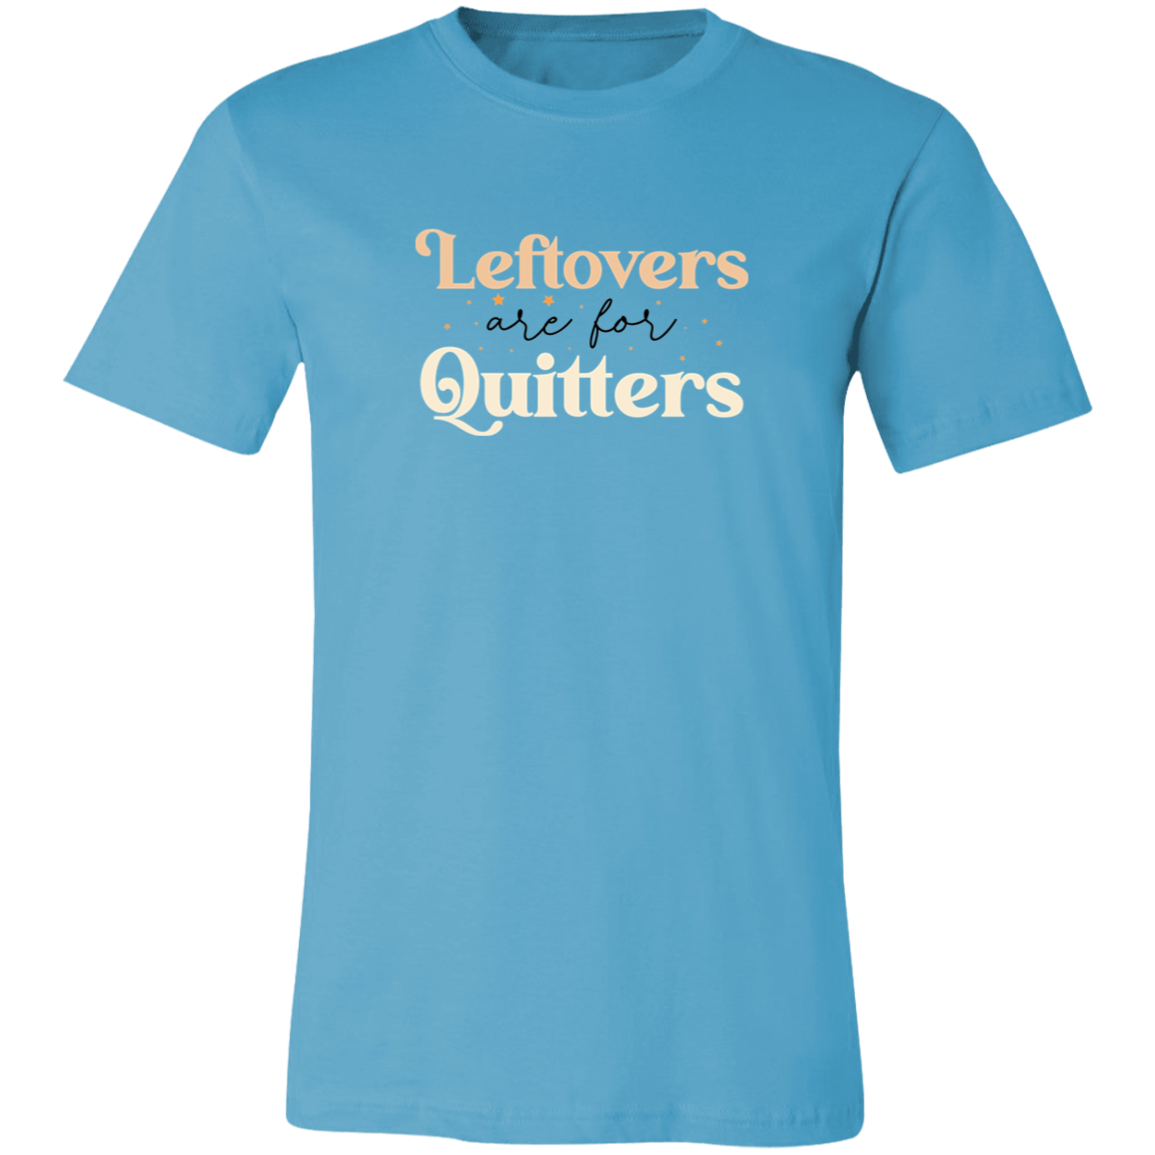 Leftovers are for Quitters Shirt